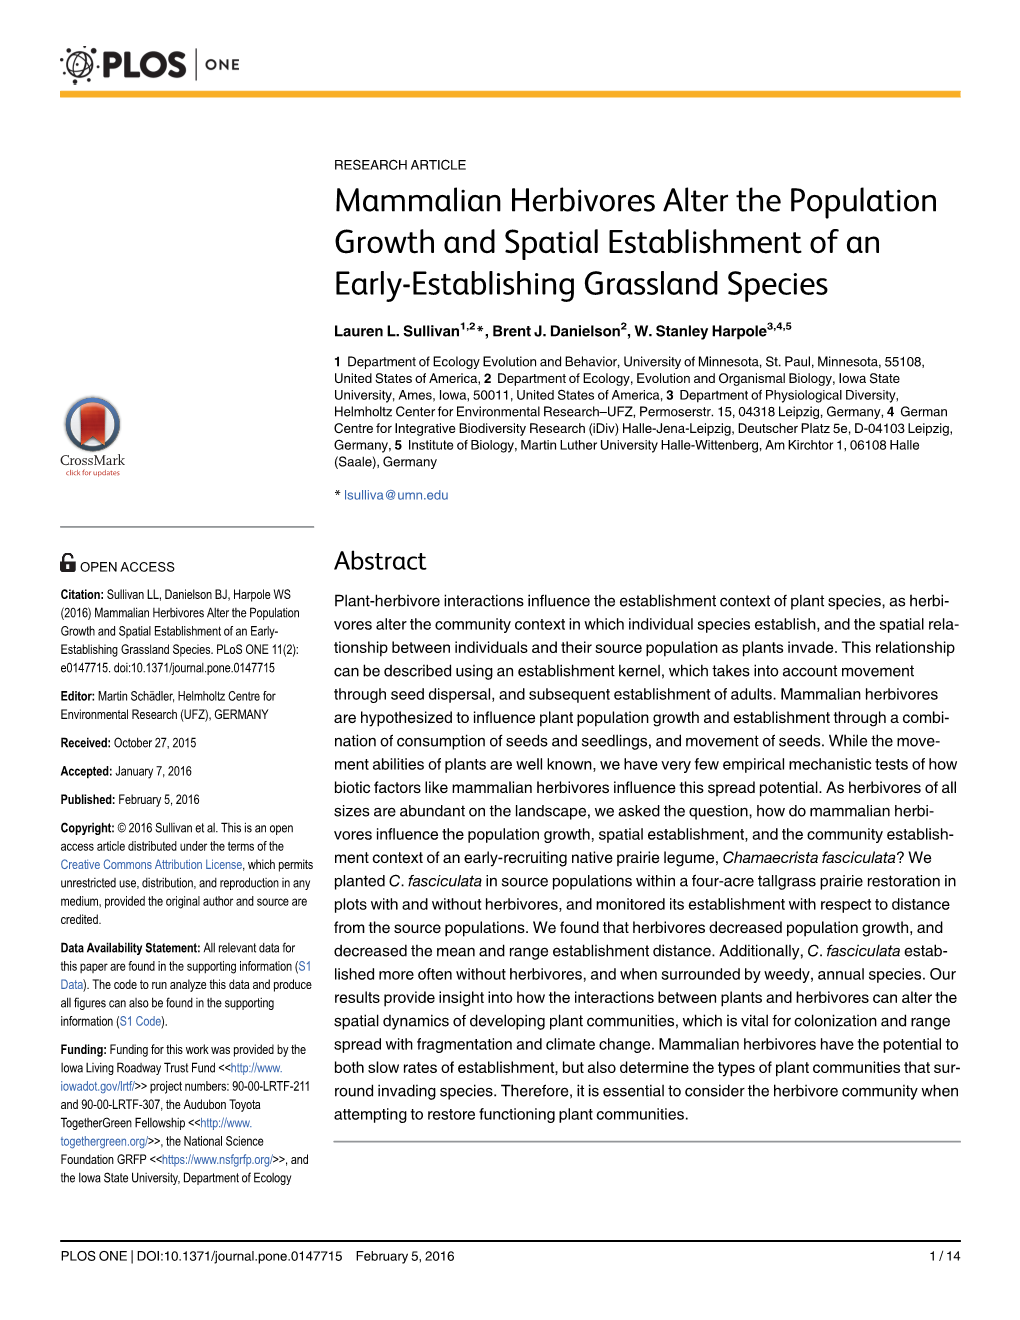 Mammalian Herbivores Alter the Population Growth and Spatial Establishment of an Early-Establishing Grassland Species